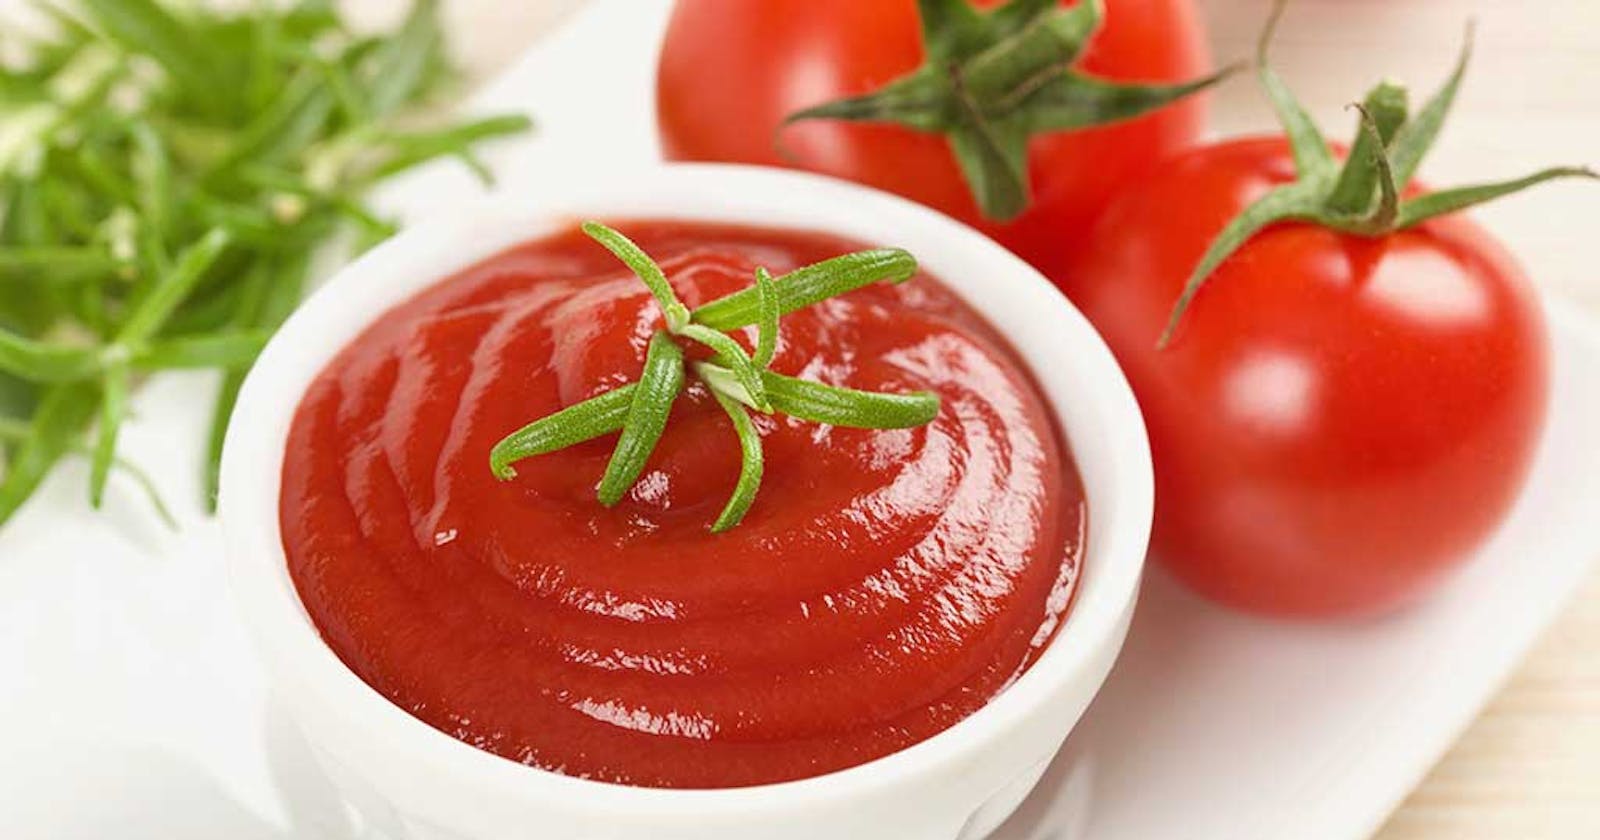 Tomato Ketchup Market Share, Industry Growth And Forecast 2022-2027